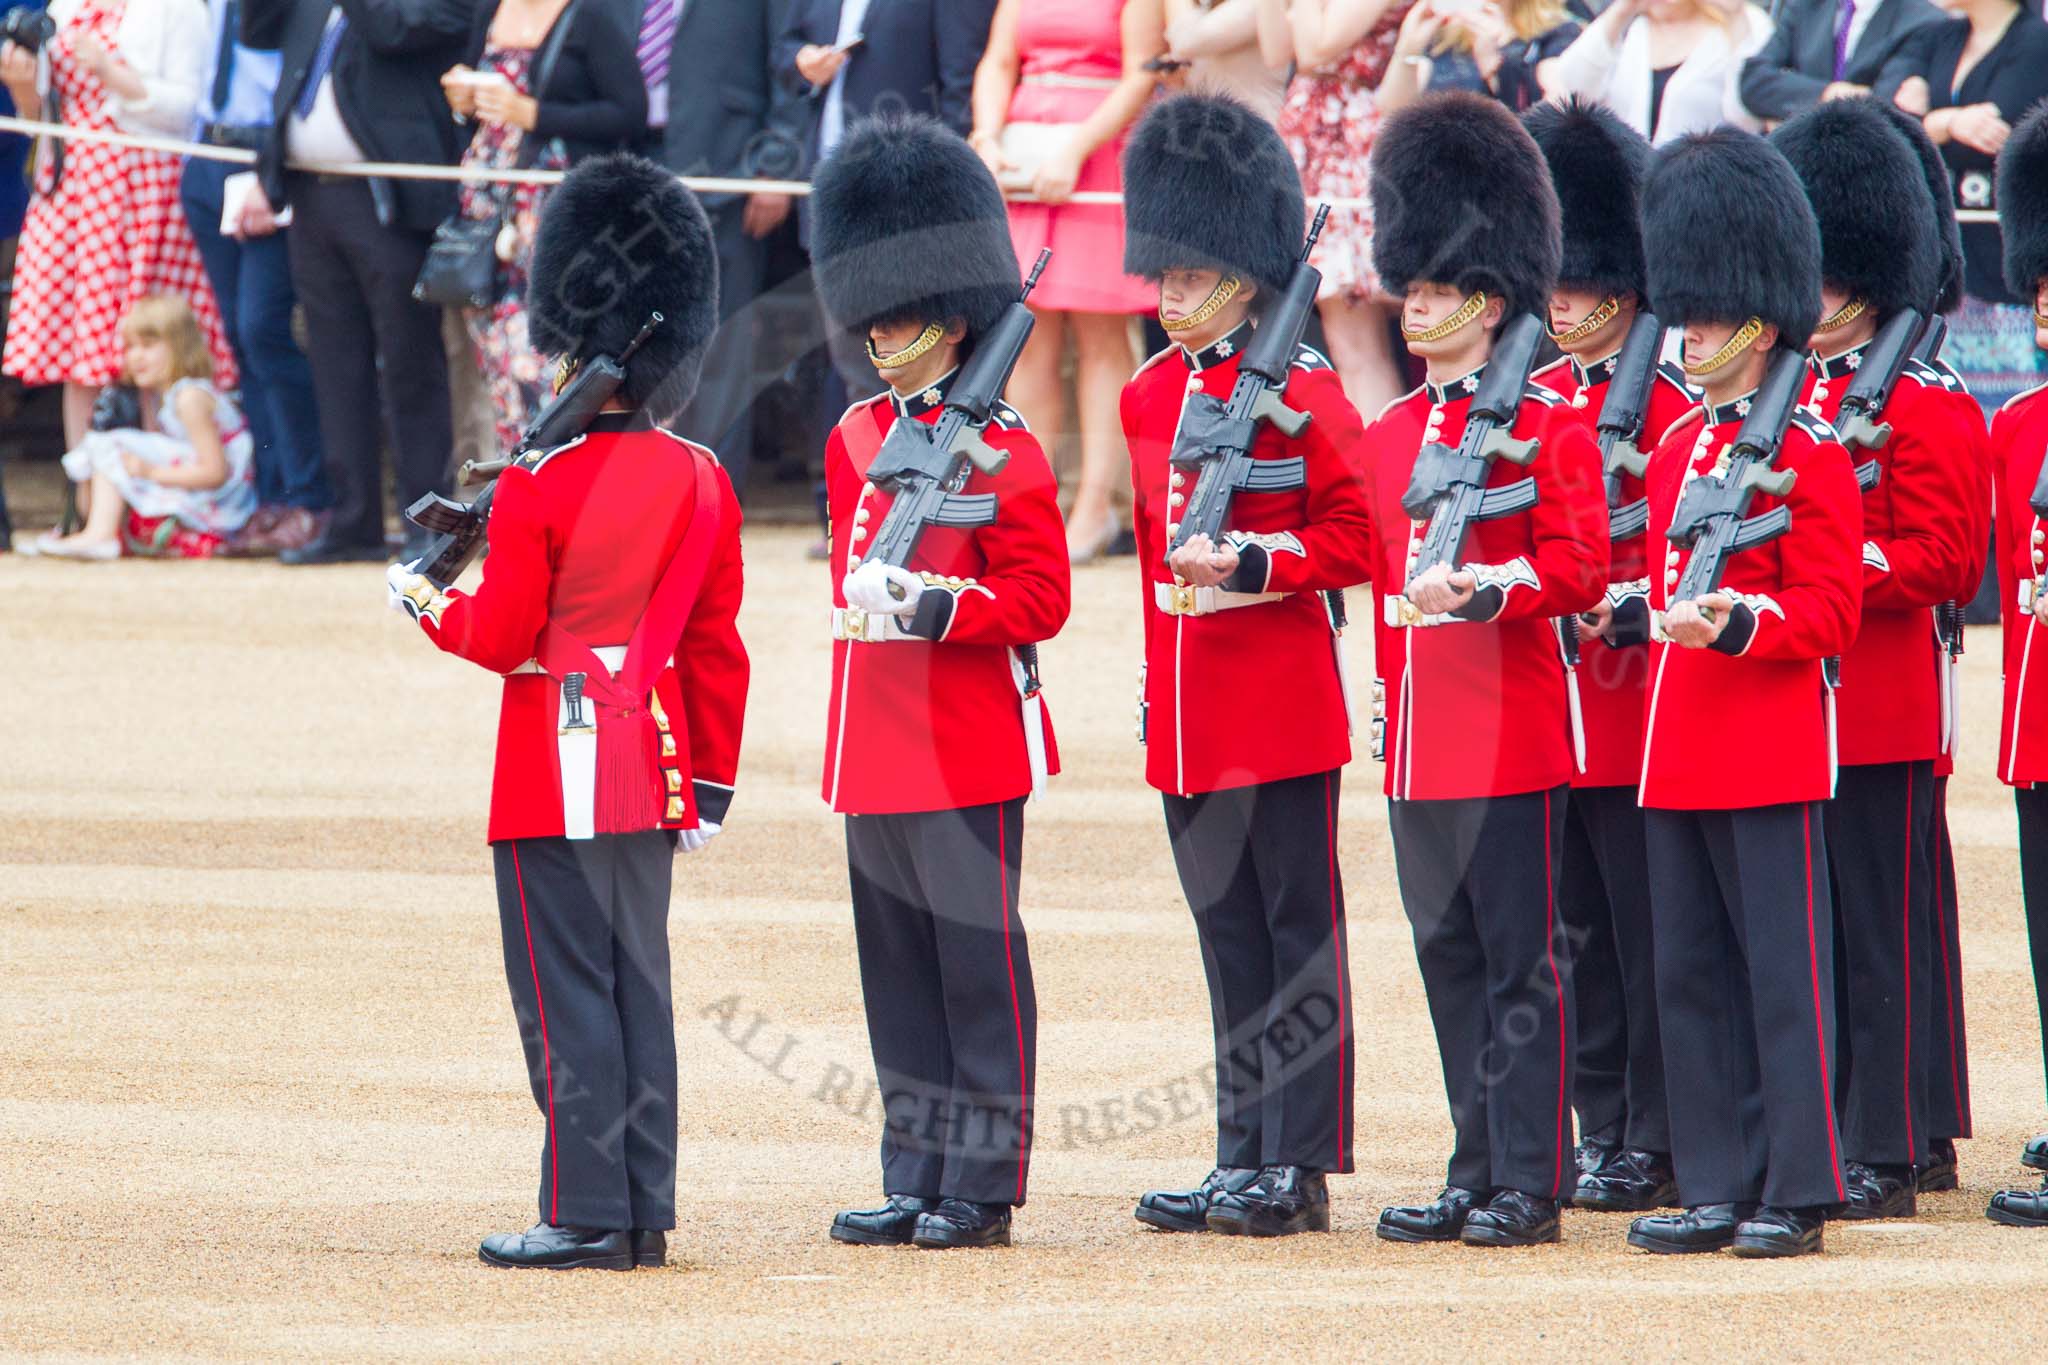 Trooping the Colour 2014.
Horse Guards Parade, Westminster,
London SW1A,

United Kingdom,
on 14 June 2014 at 10:24, image #130